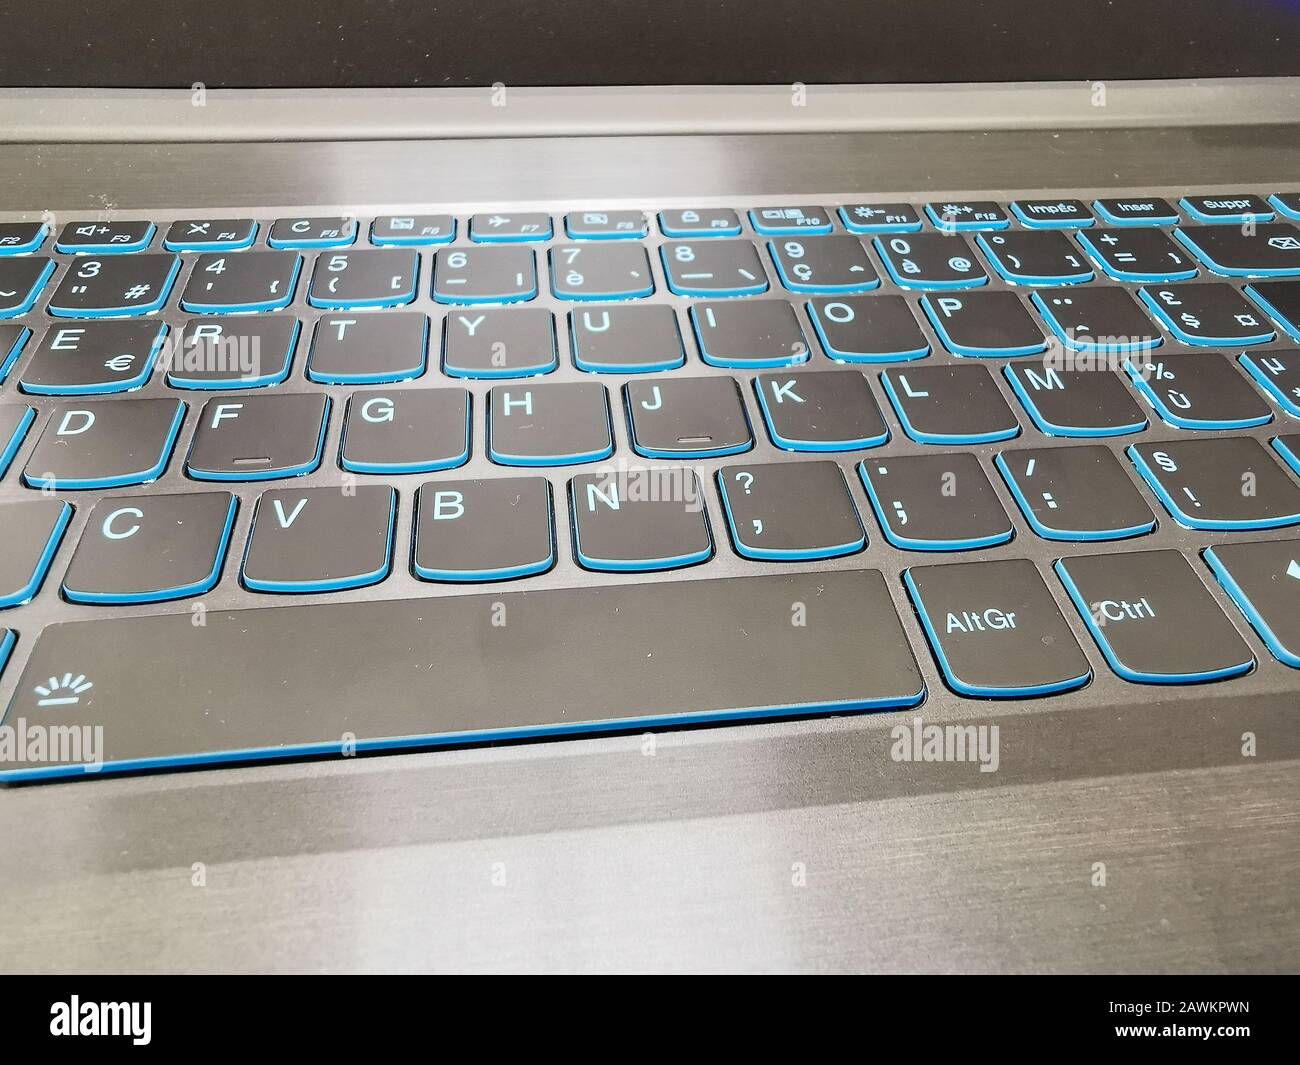 Modern laptop gaming with blue led backlight Stock Alamy